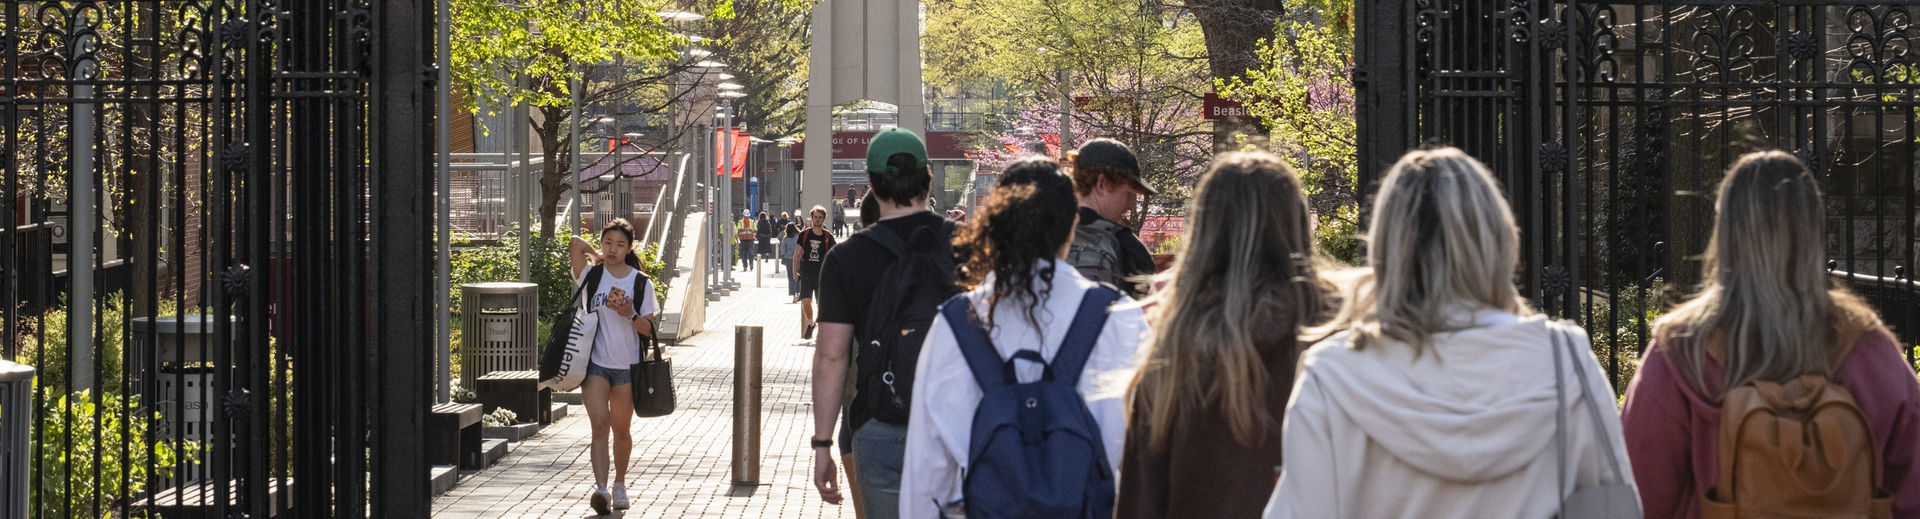 students walk across campus on a sunny day.